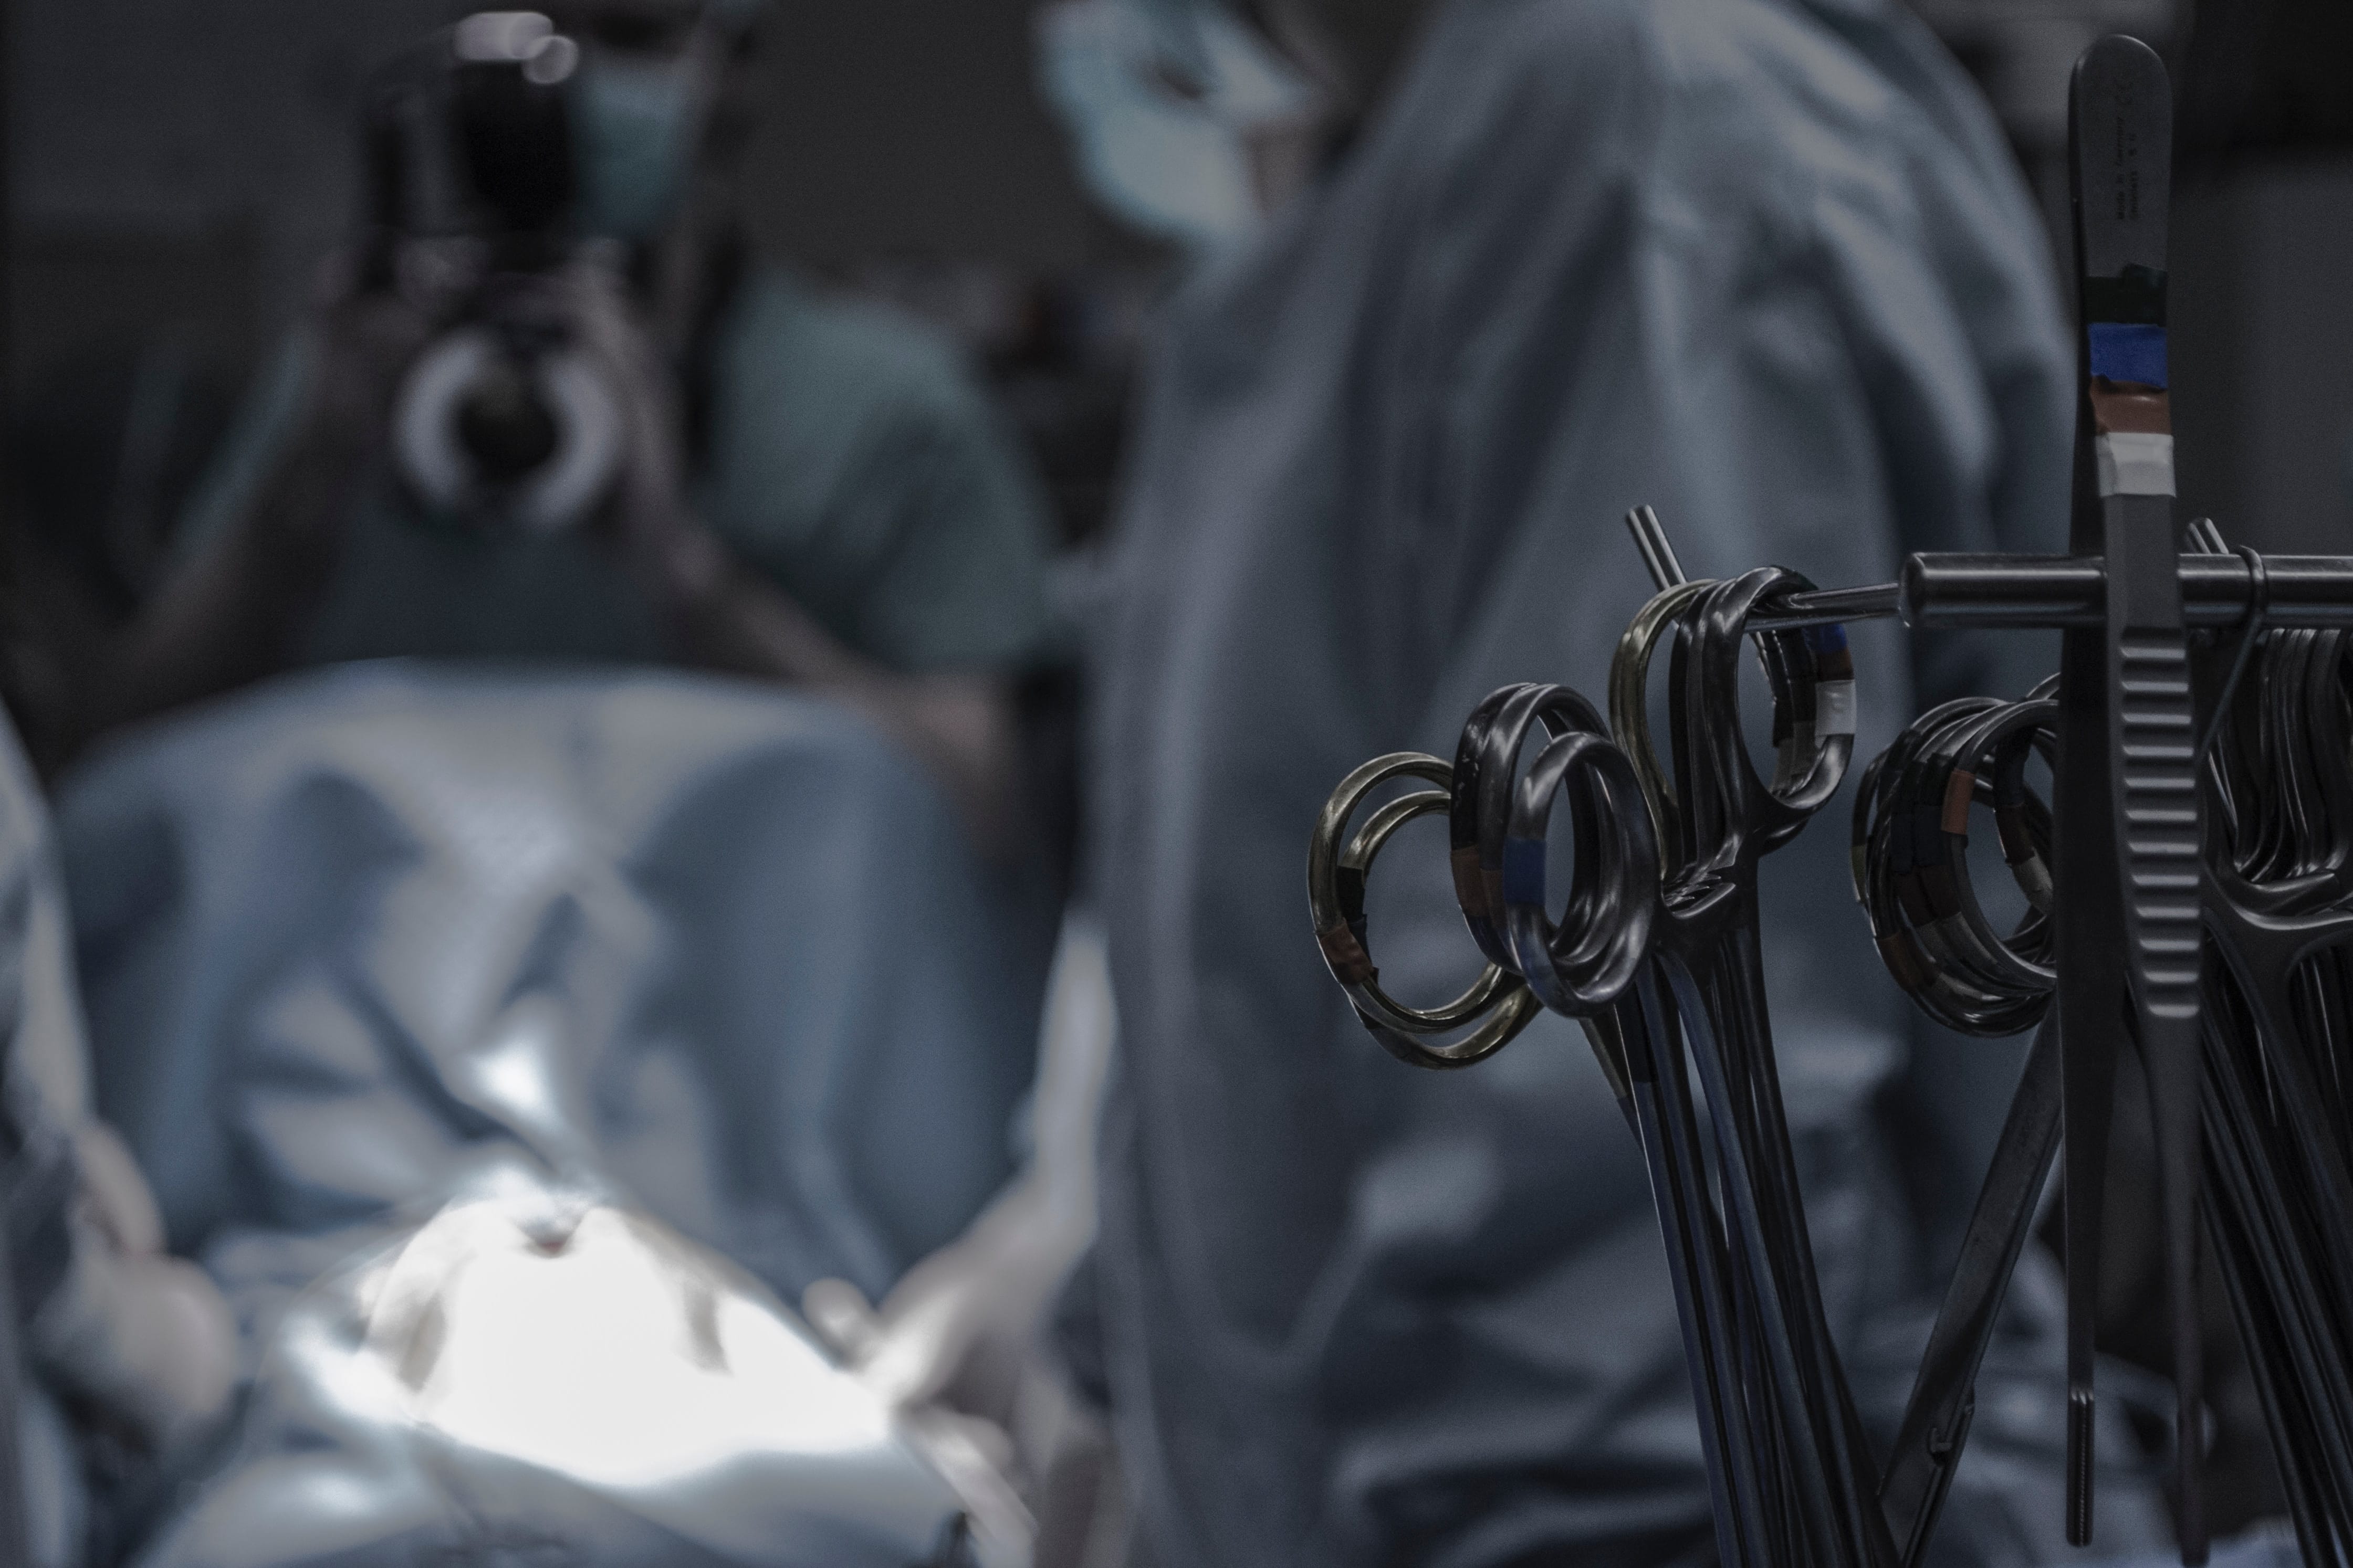 Gray surgical scissors near doctors in operating room; image by Piron Guillaume, via Unsplash.com.